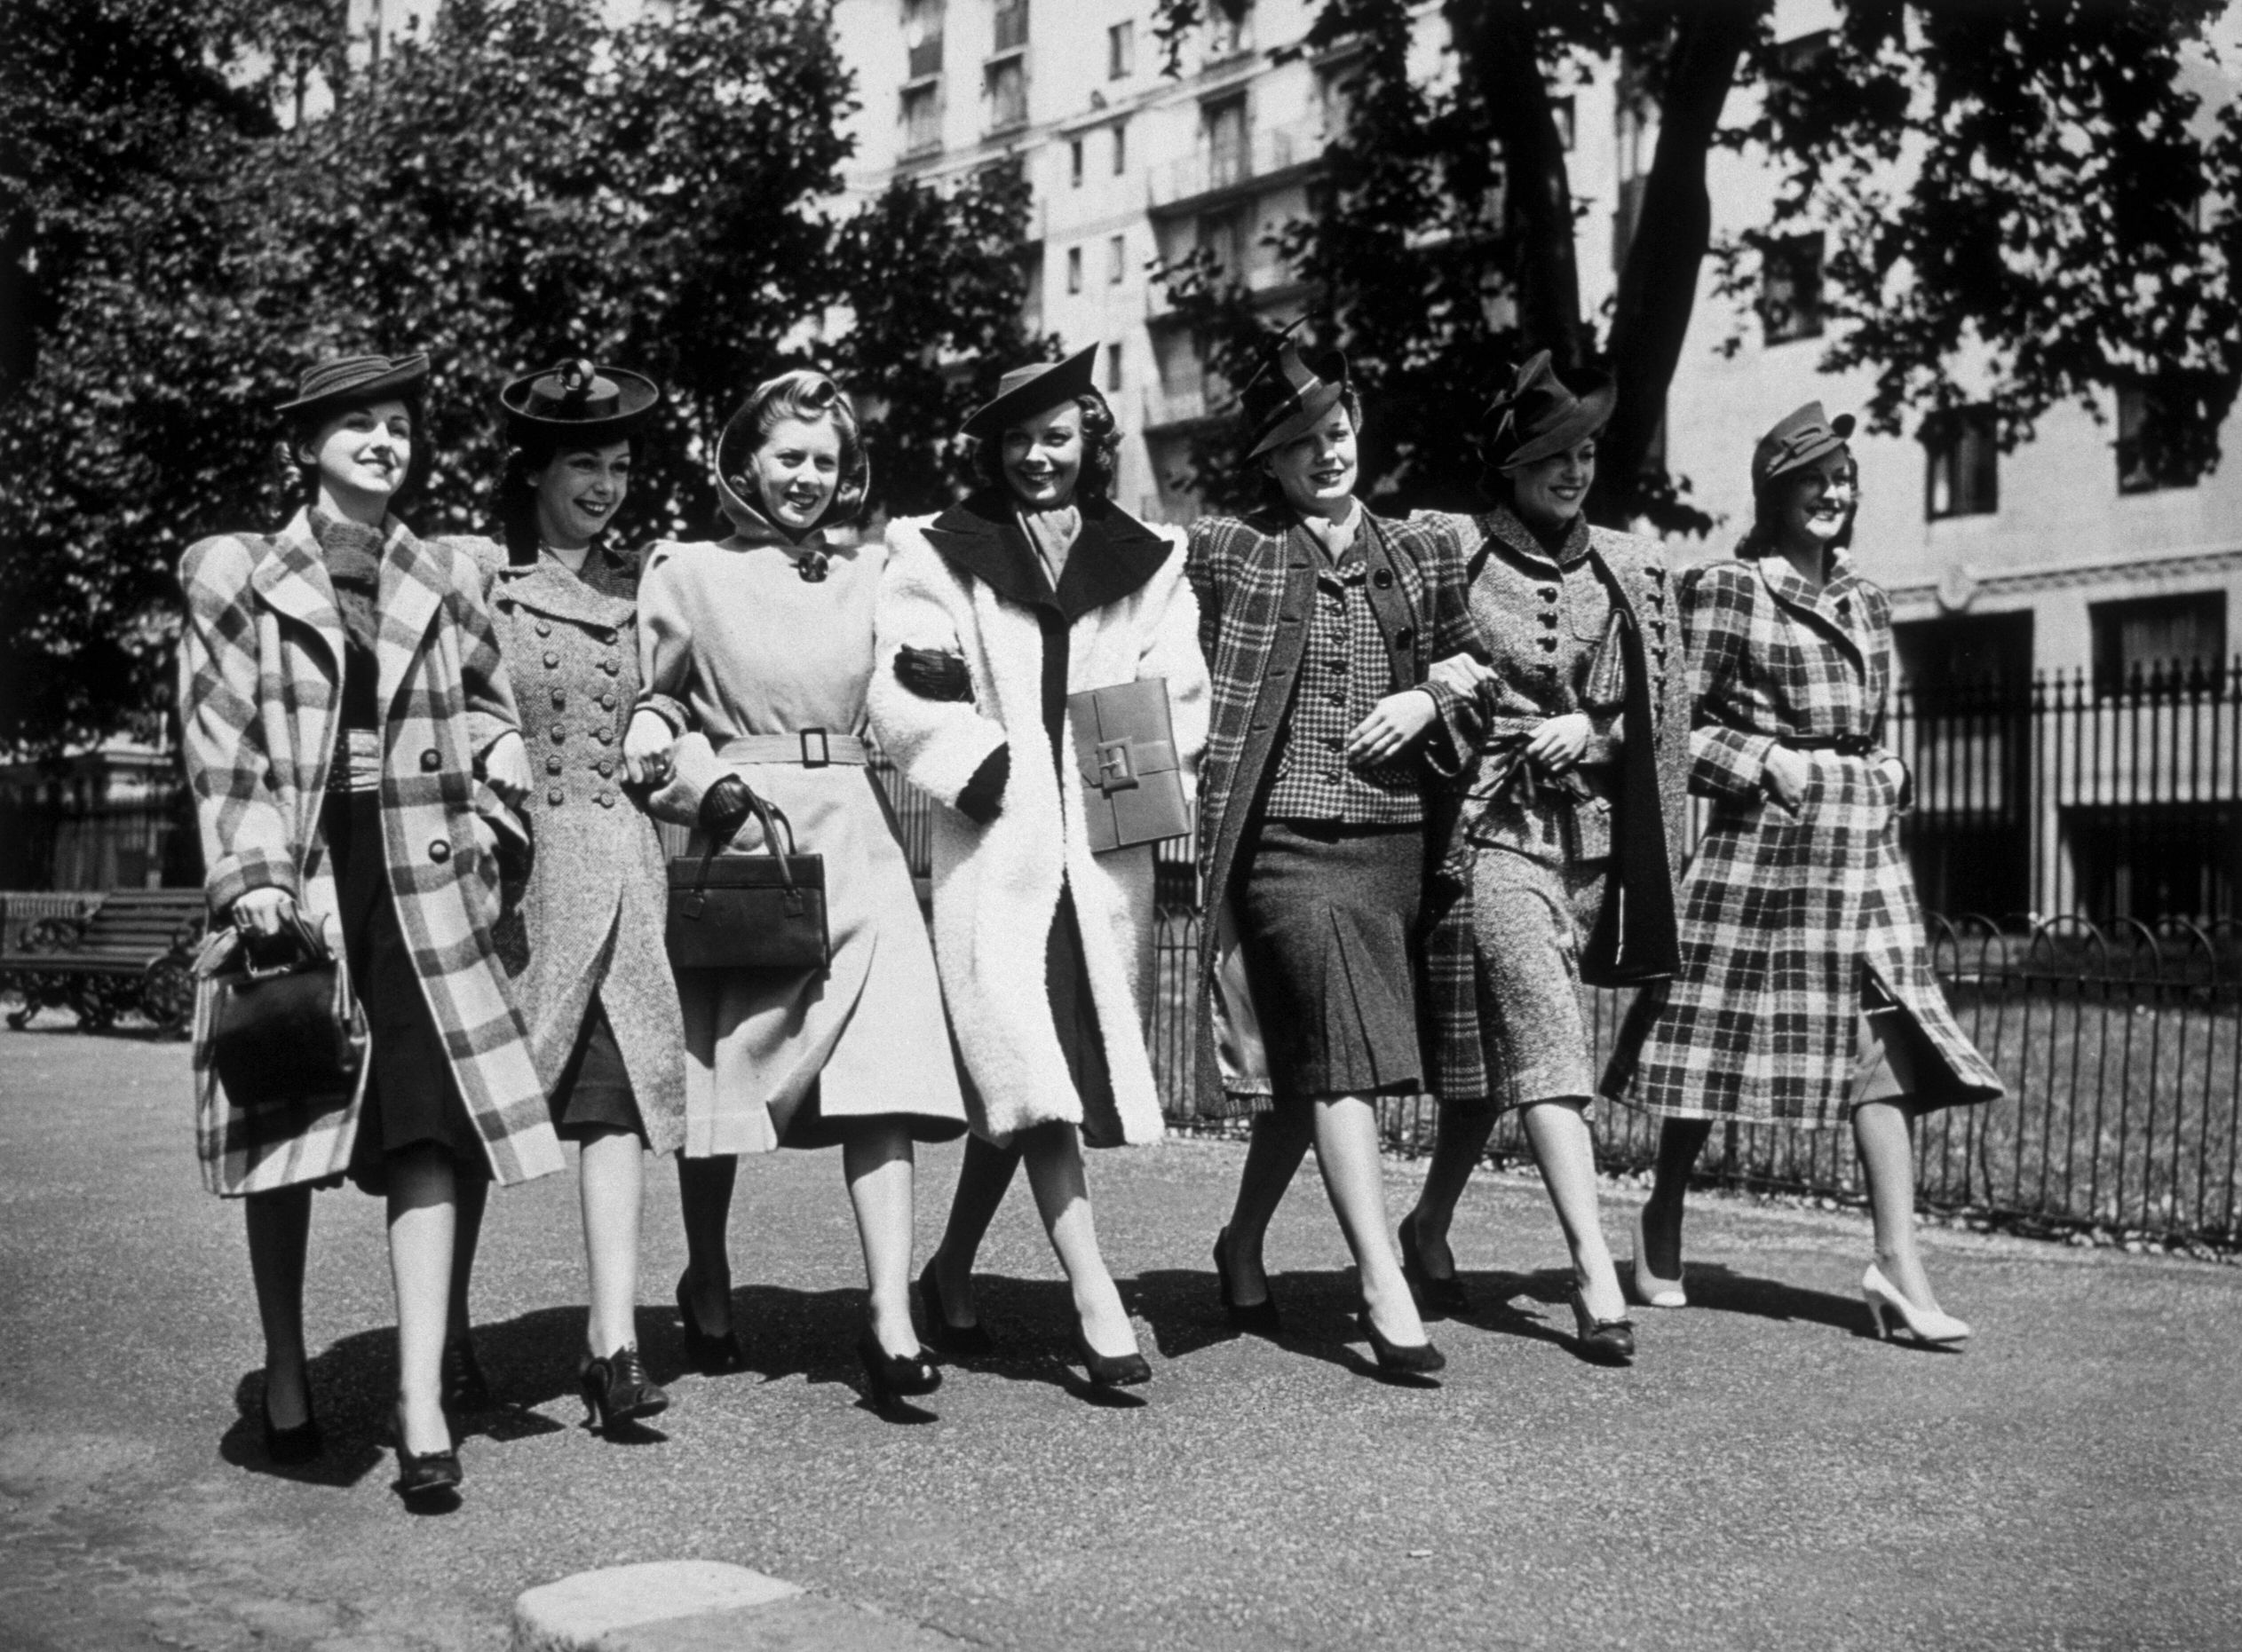 Stunning Photos Show the Fashion and Style Trends of 1940s - Rare  Historical Photos